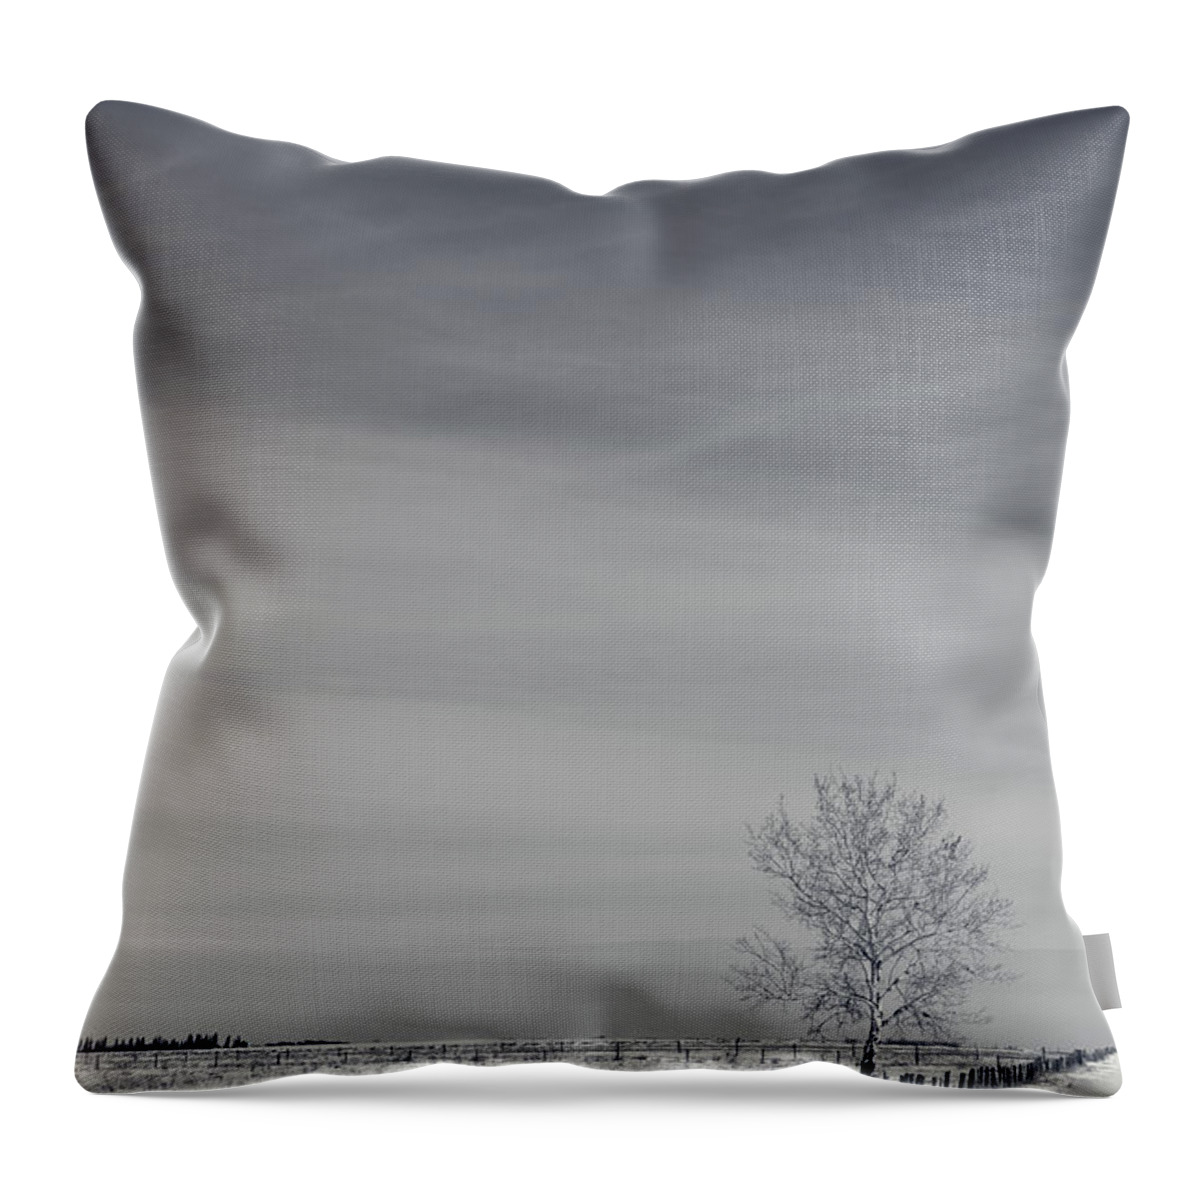 2015 Throw Pillow featuring the photograph Days Turn Into Months by Sandra Parlow